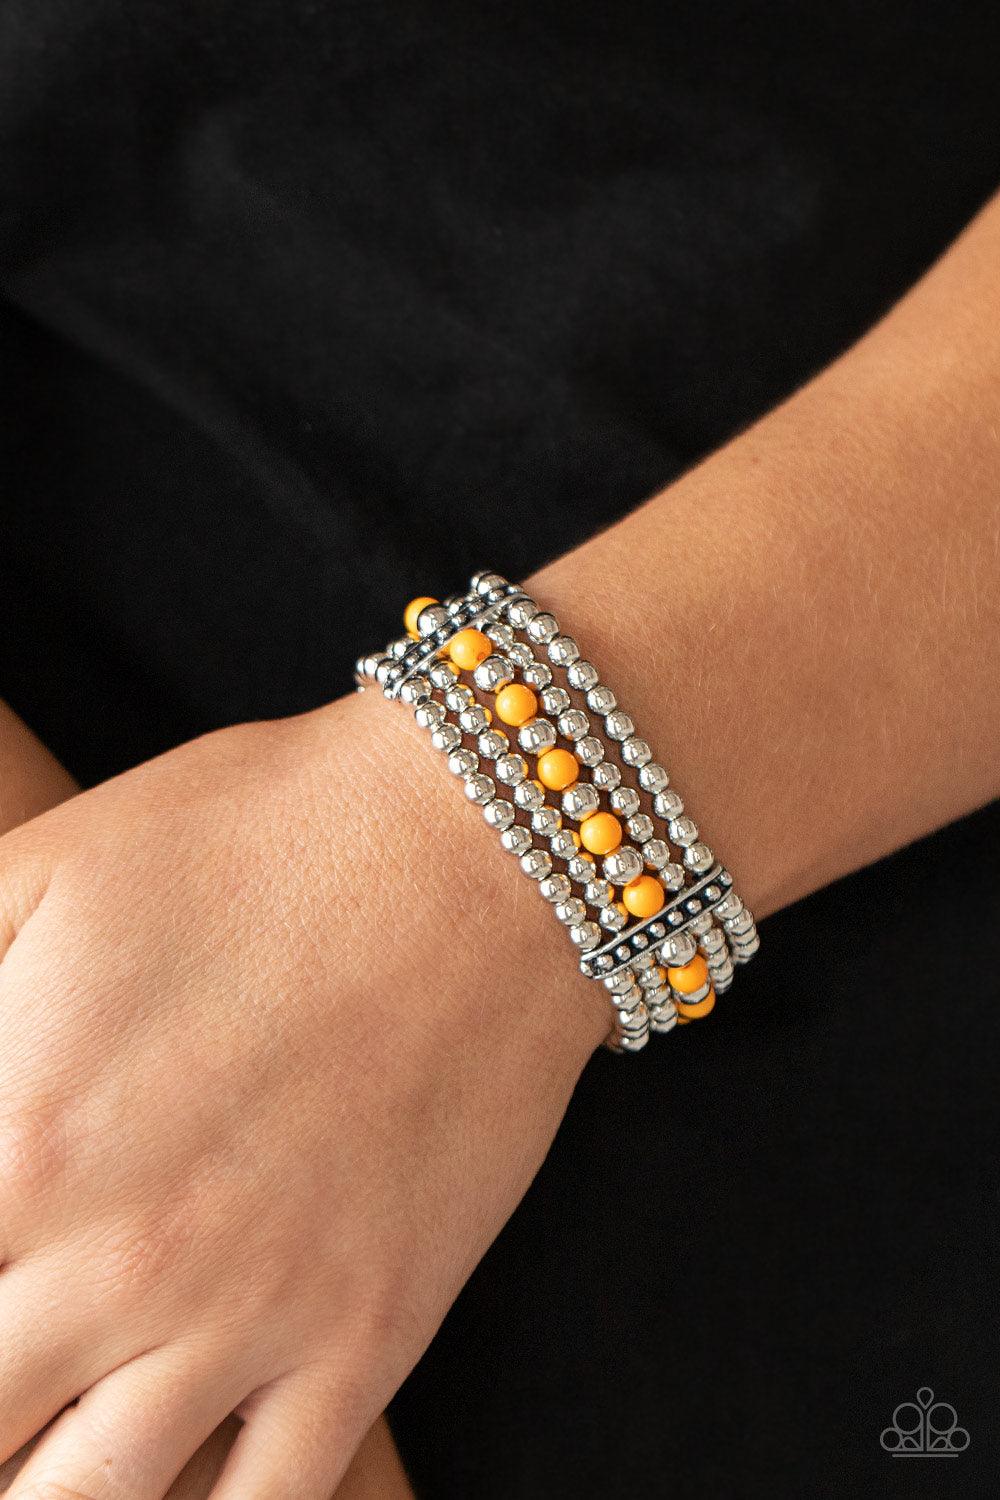 Paparazzi Accessories Gloss Over The Details - Orange Held together by studded silver frames, rows of silver and Marigold beads are threaded along stretchy bands around the wrist, creating vivacious layers. Sold as one individual bracelet. Jewelry